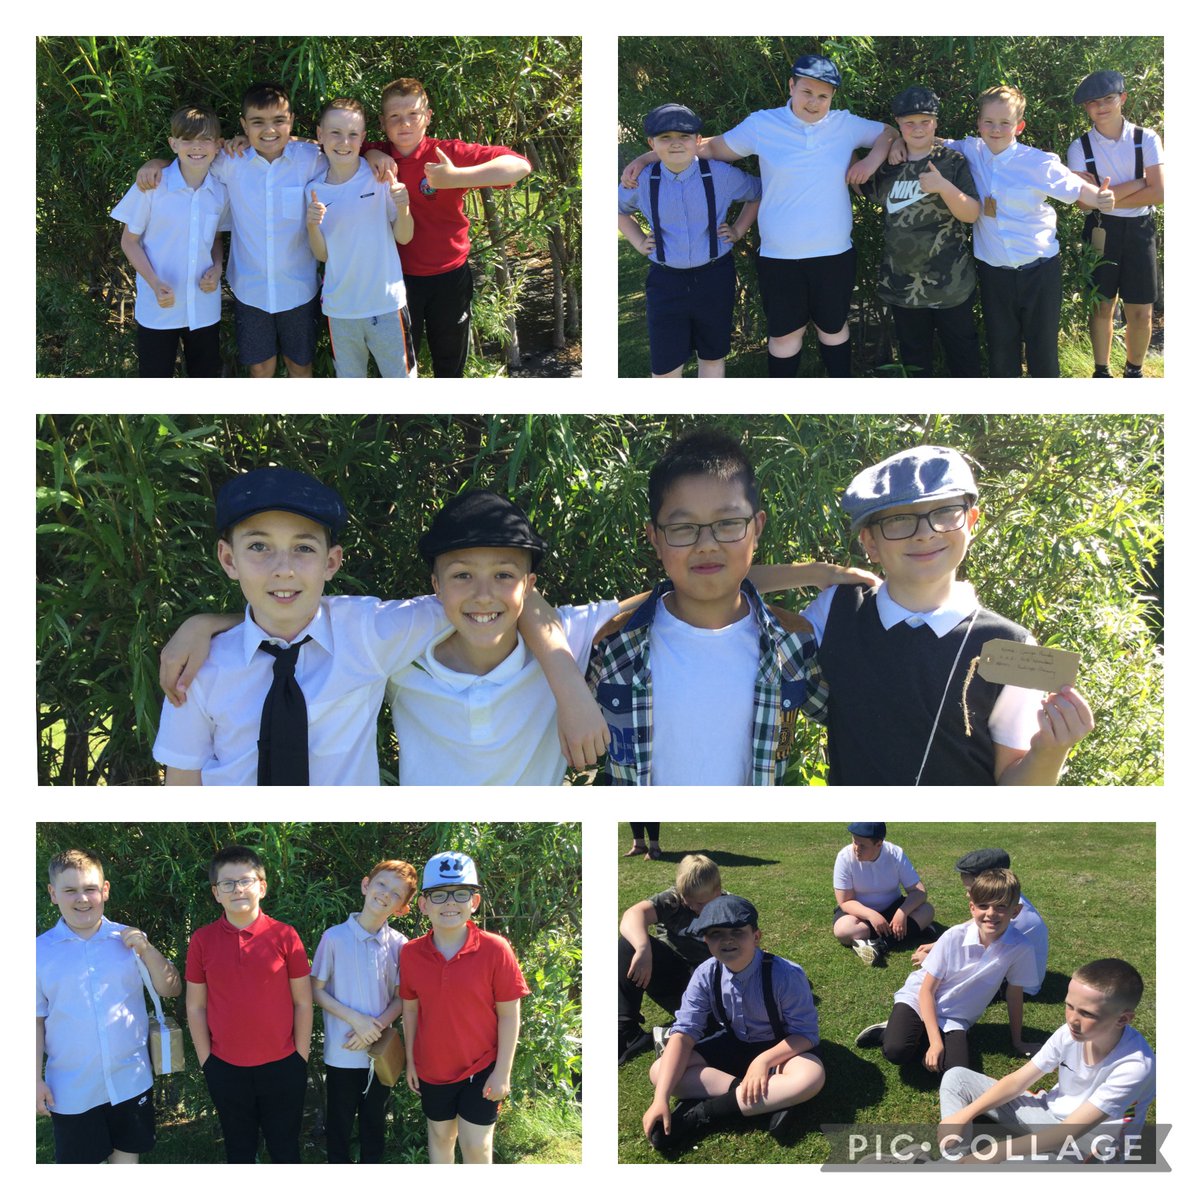 Y6 have thoroughly enjoyed learning about World War II but have loved celebrating VE Day even more! The children looked fantastic! More photos to follow. @RedscopeSchool @MrsWalpoleC13